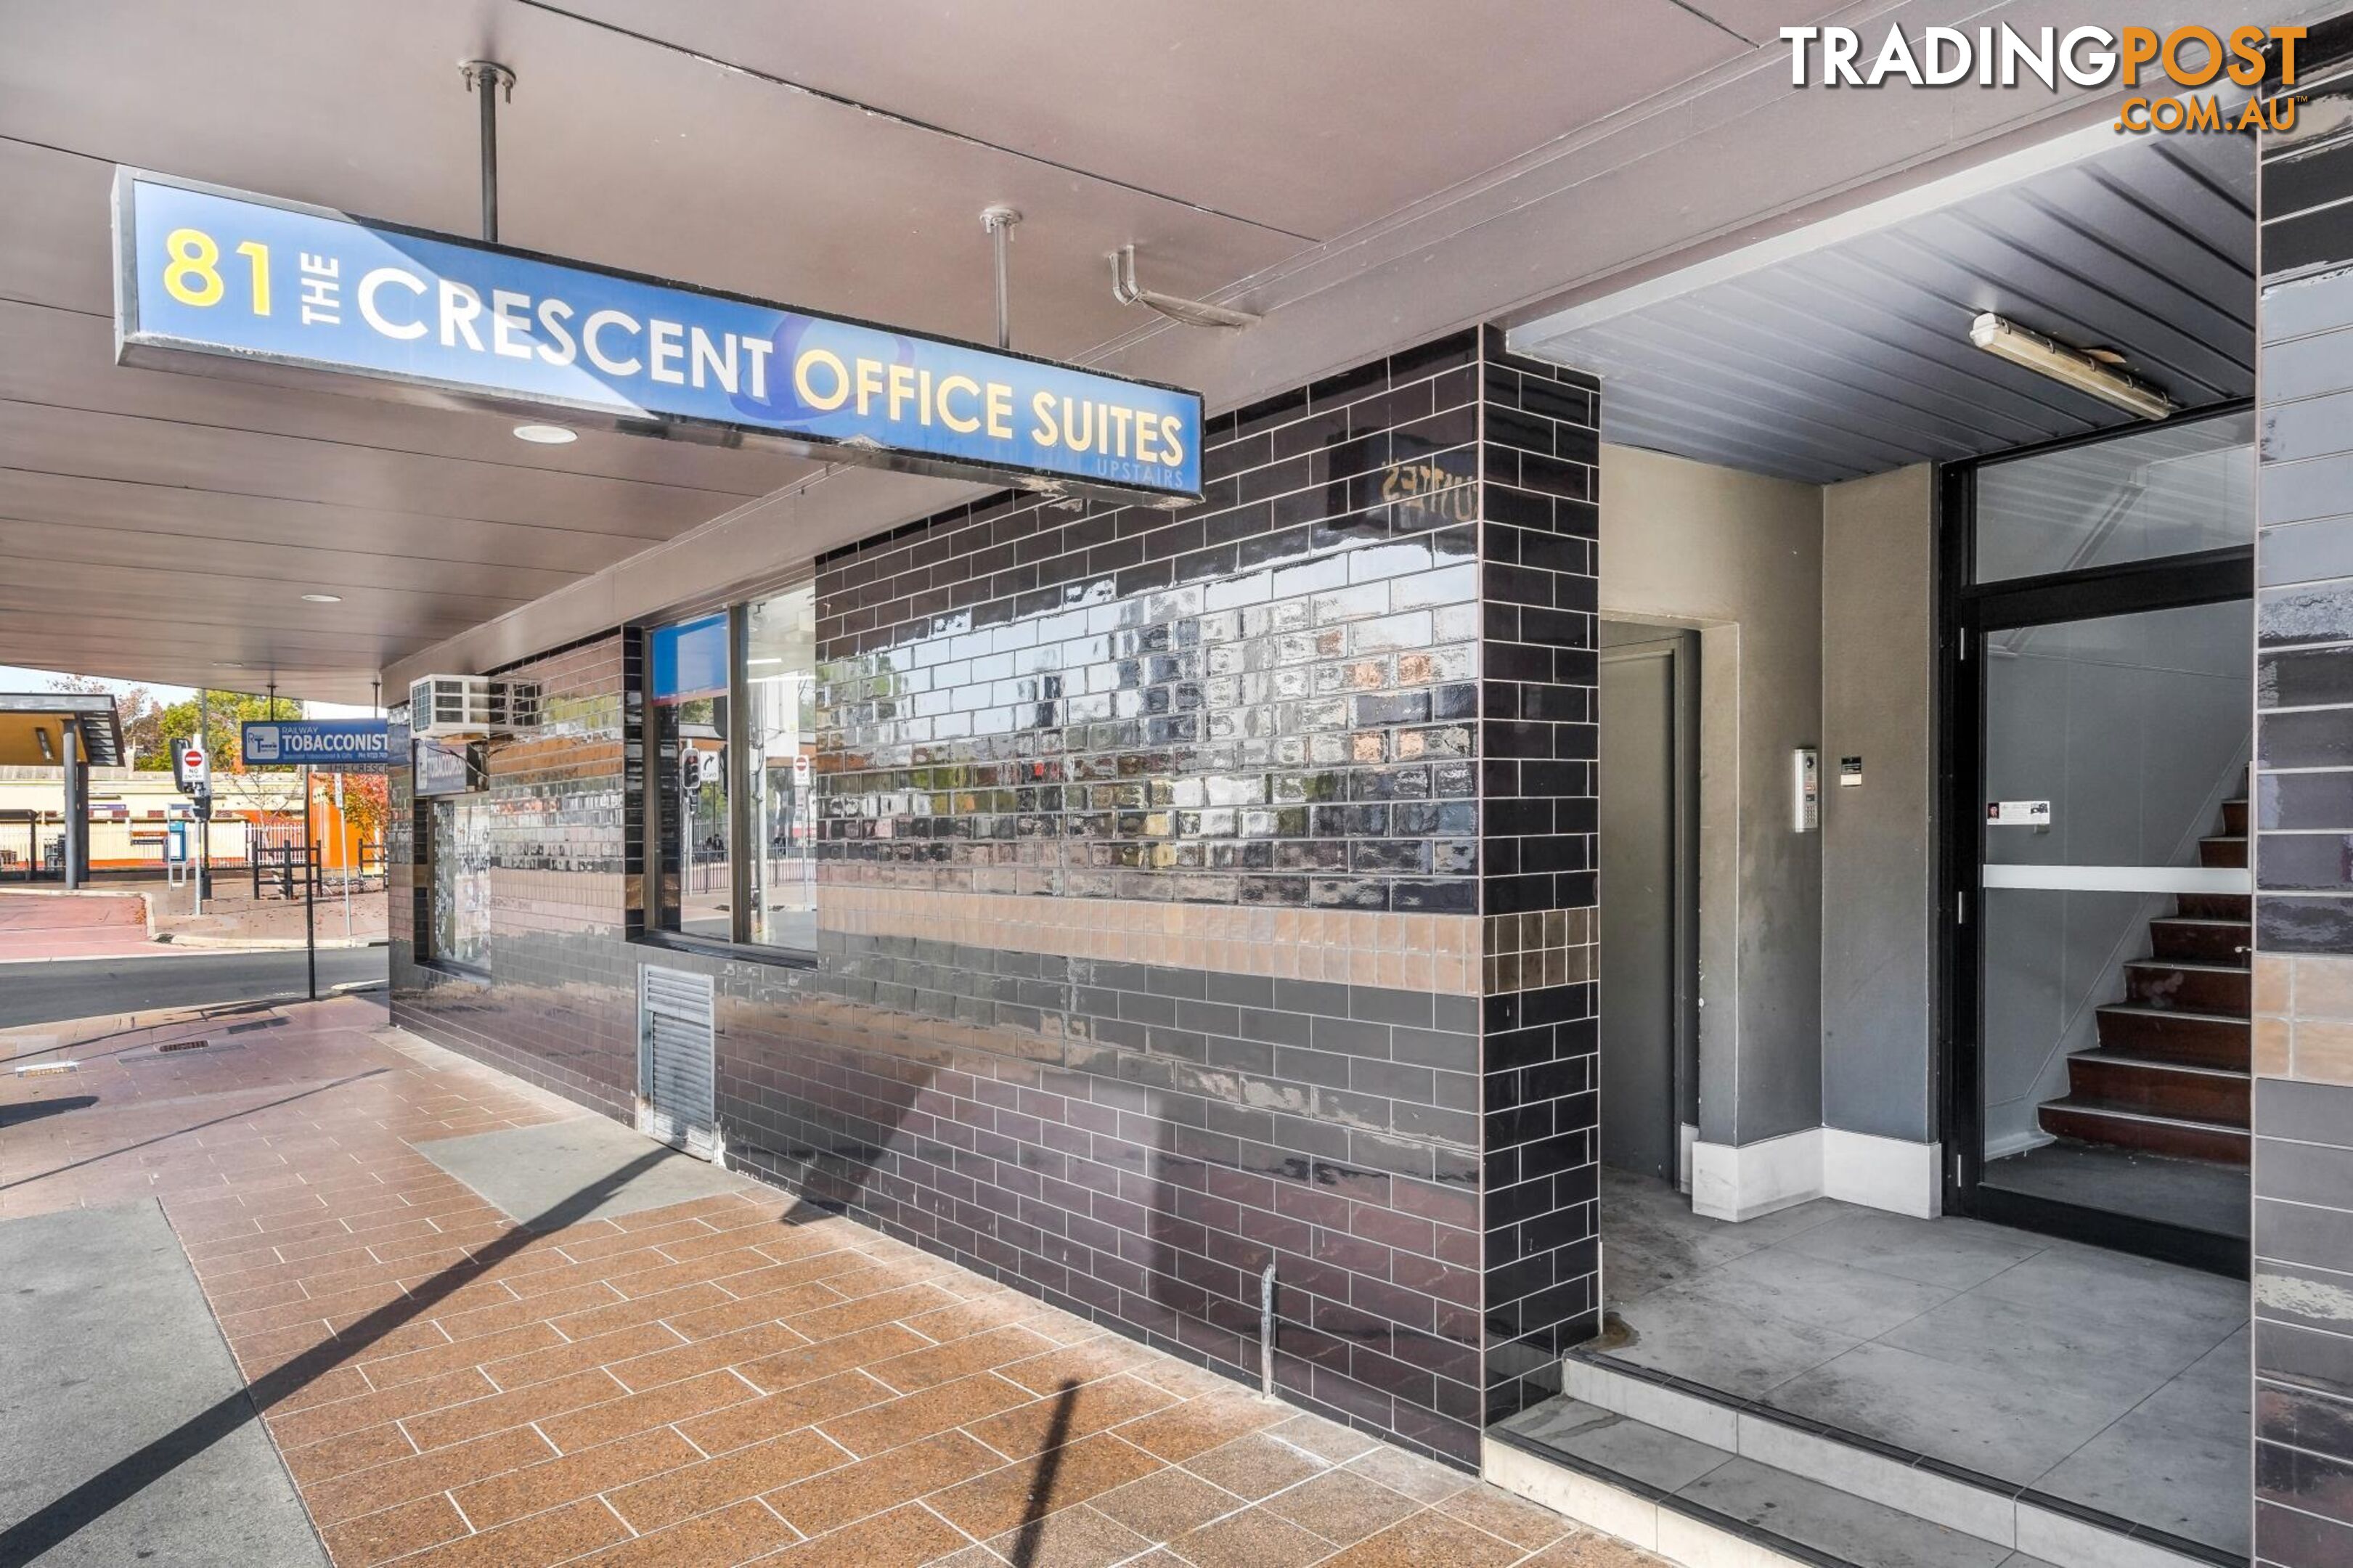 Lot 7, 81 The Crescent FAIRFIELD NSW 2165